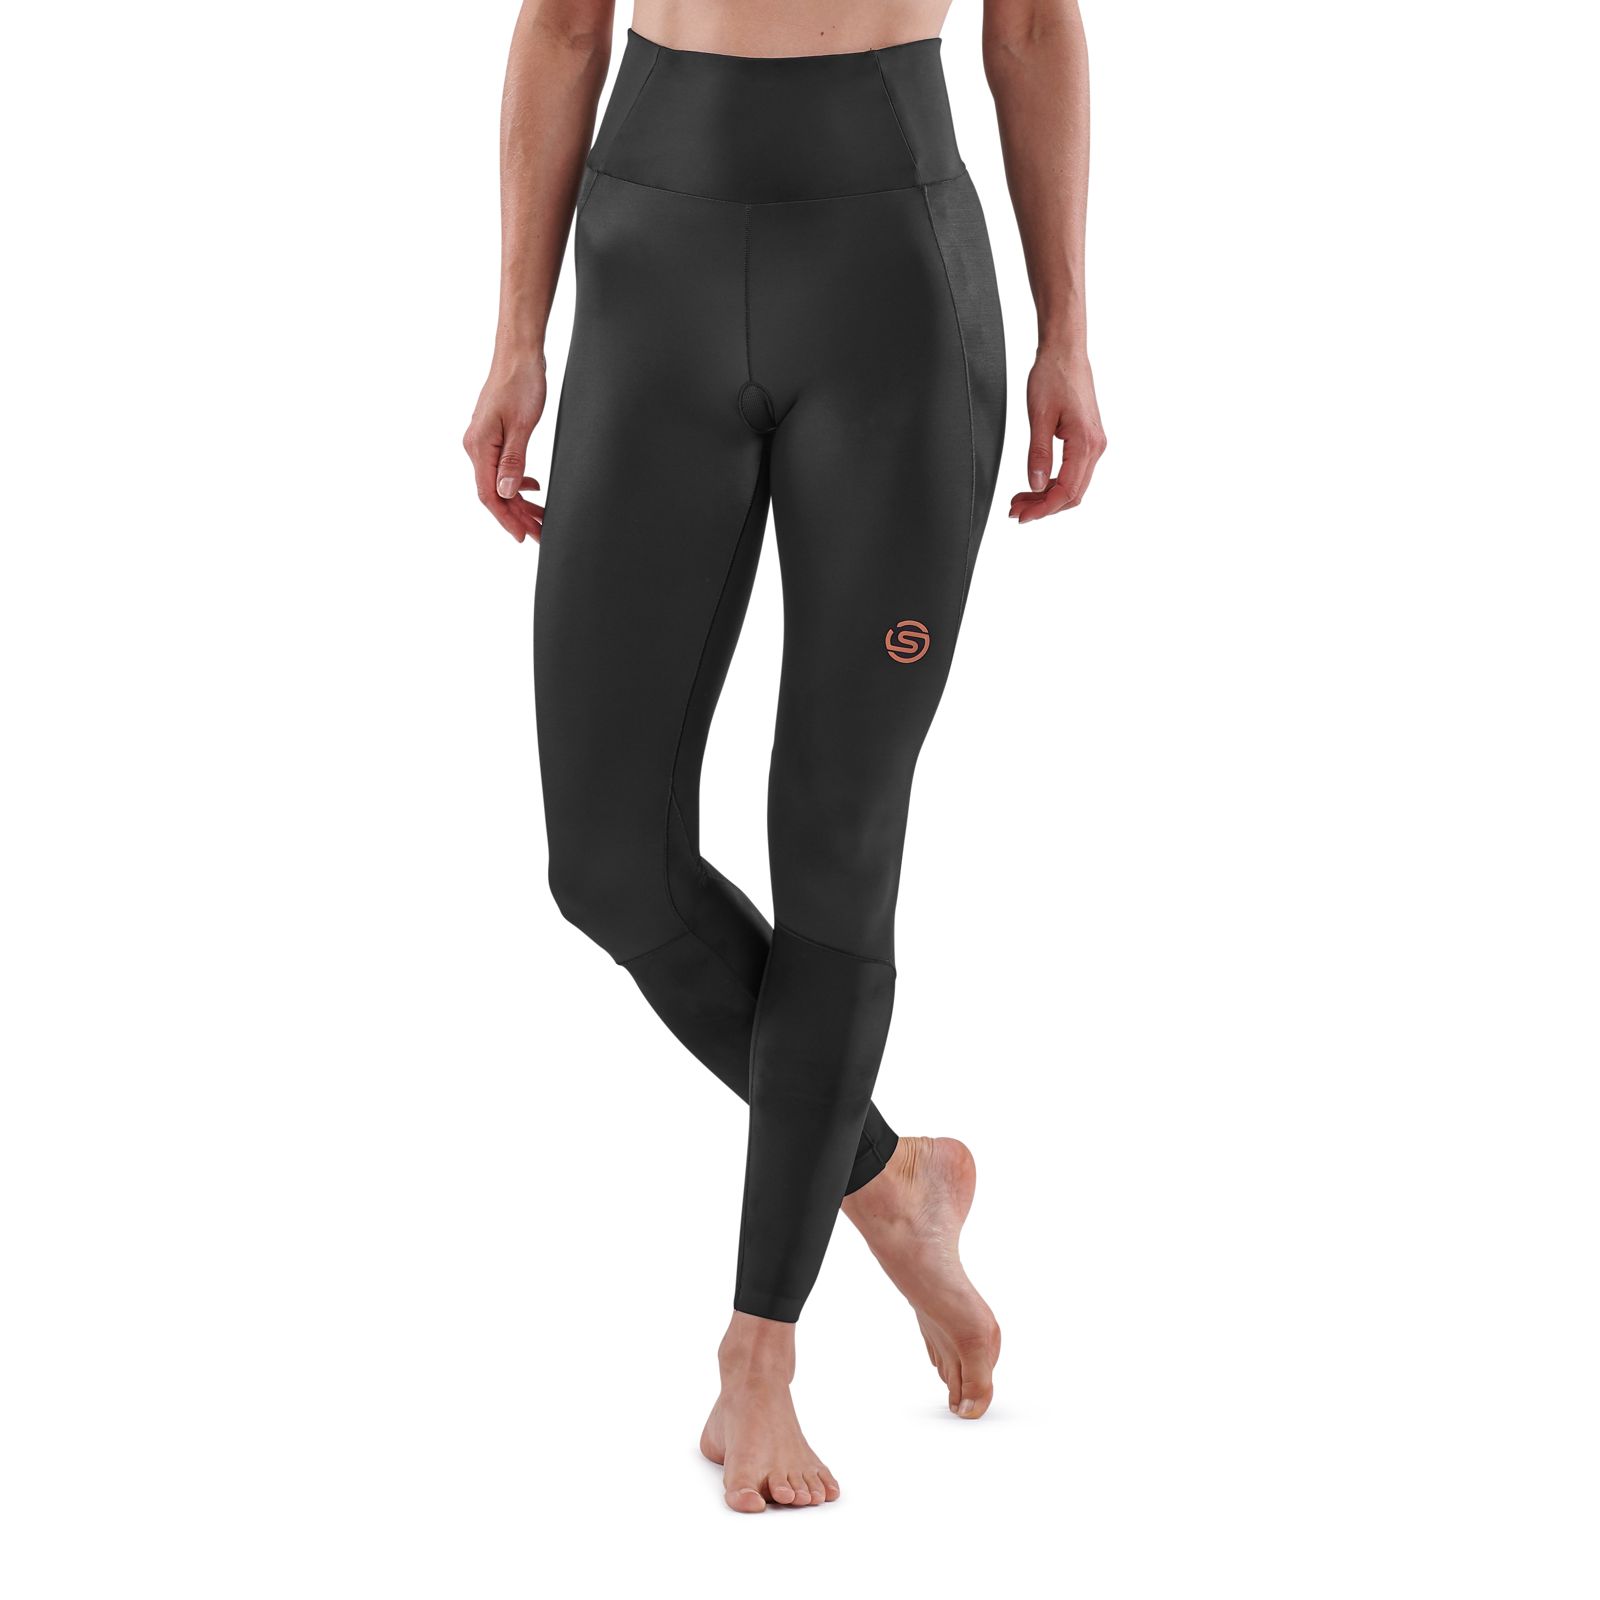 Skins womens Series-3 Skyscraper Tights Compression Pants, Black, X-Small  US at  Women's Clothing store